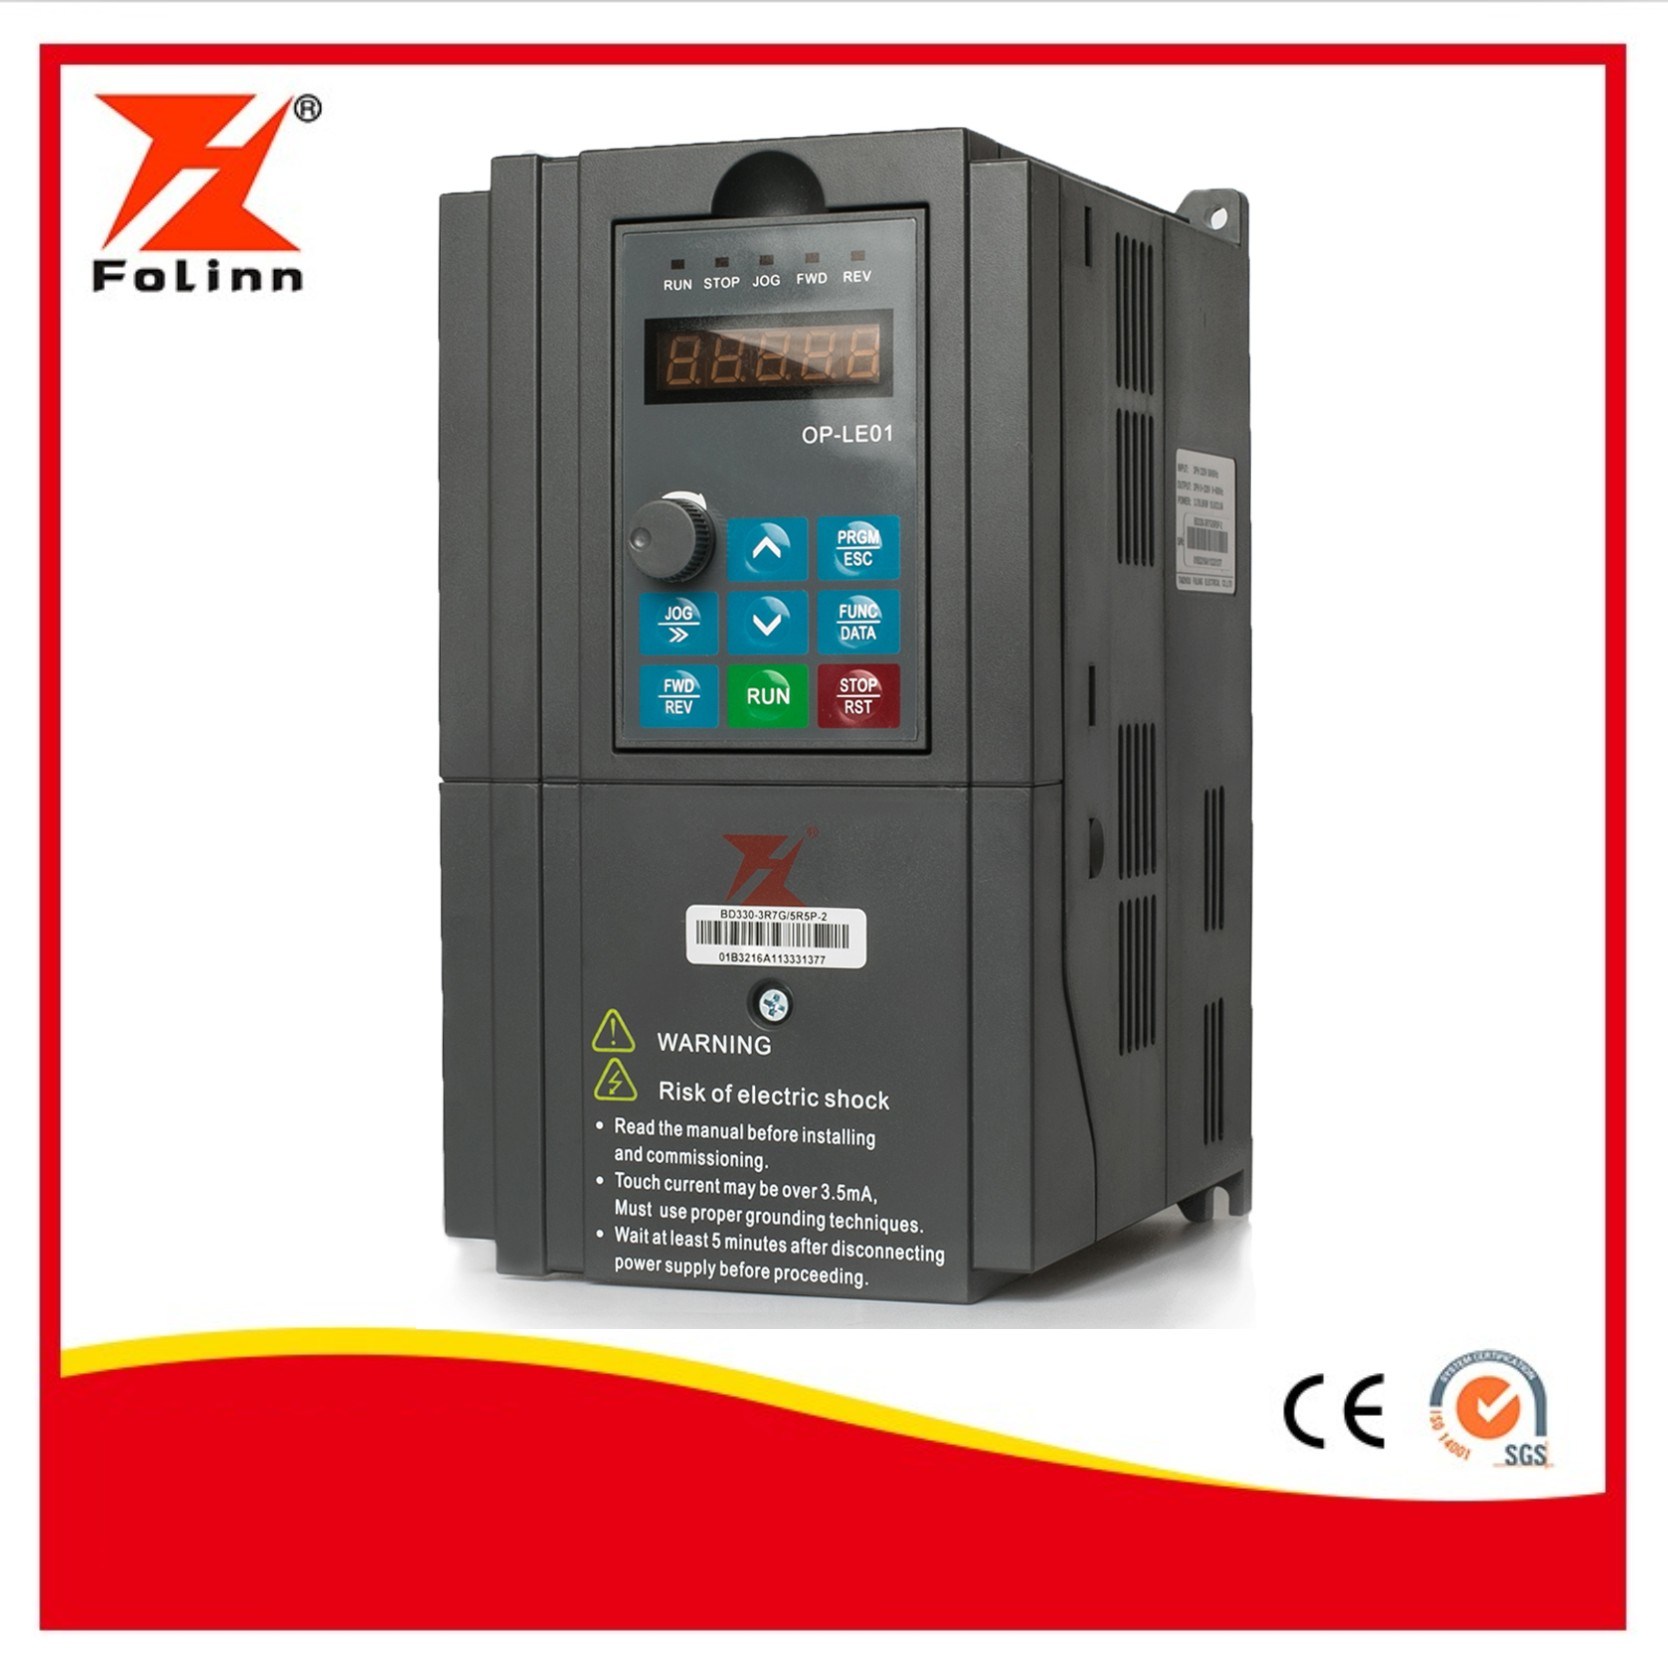 China Top 10 Brand Frequency Inverter VFD Variable Frequency Drive AC Drive (Bd1000)